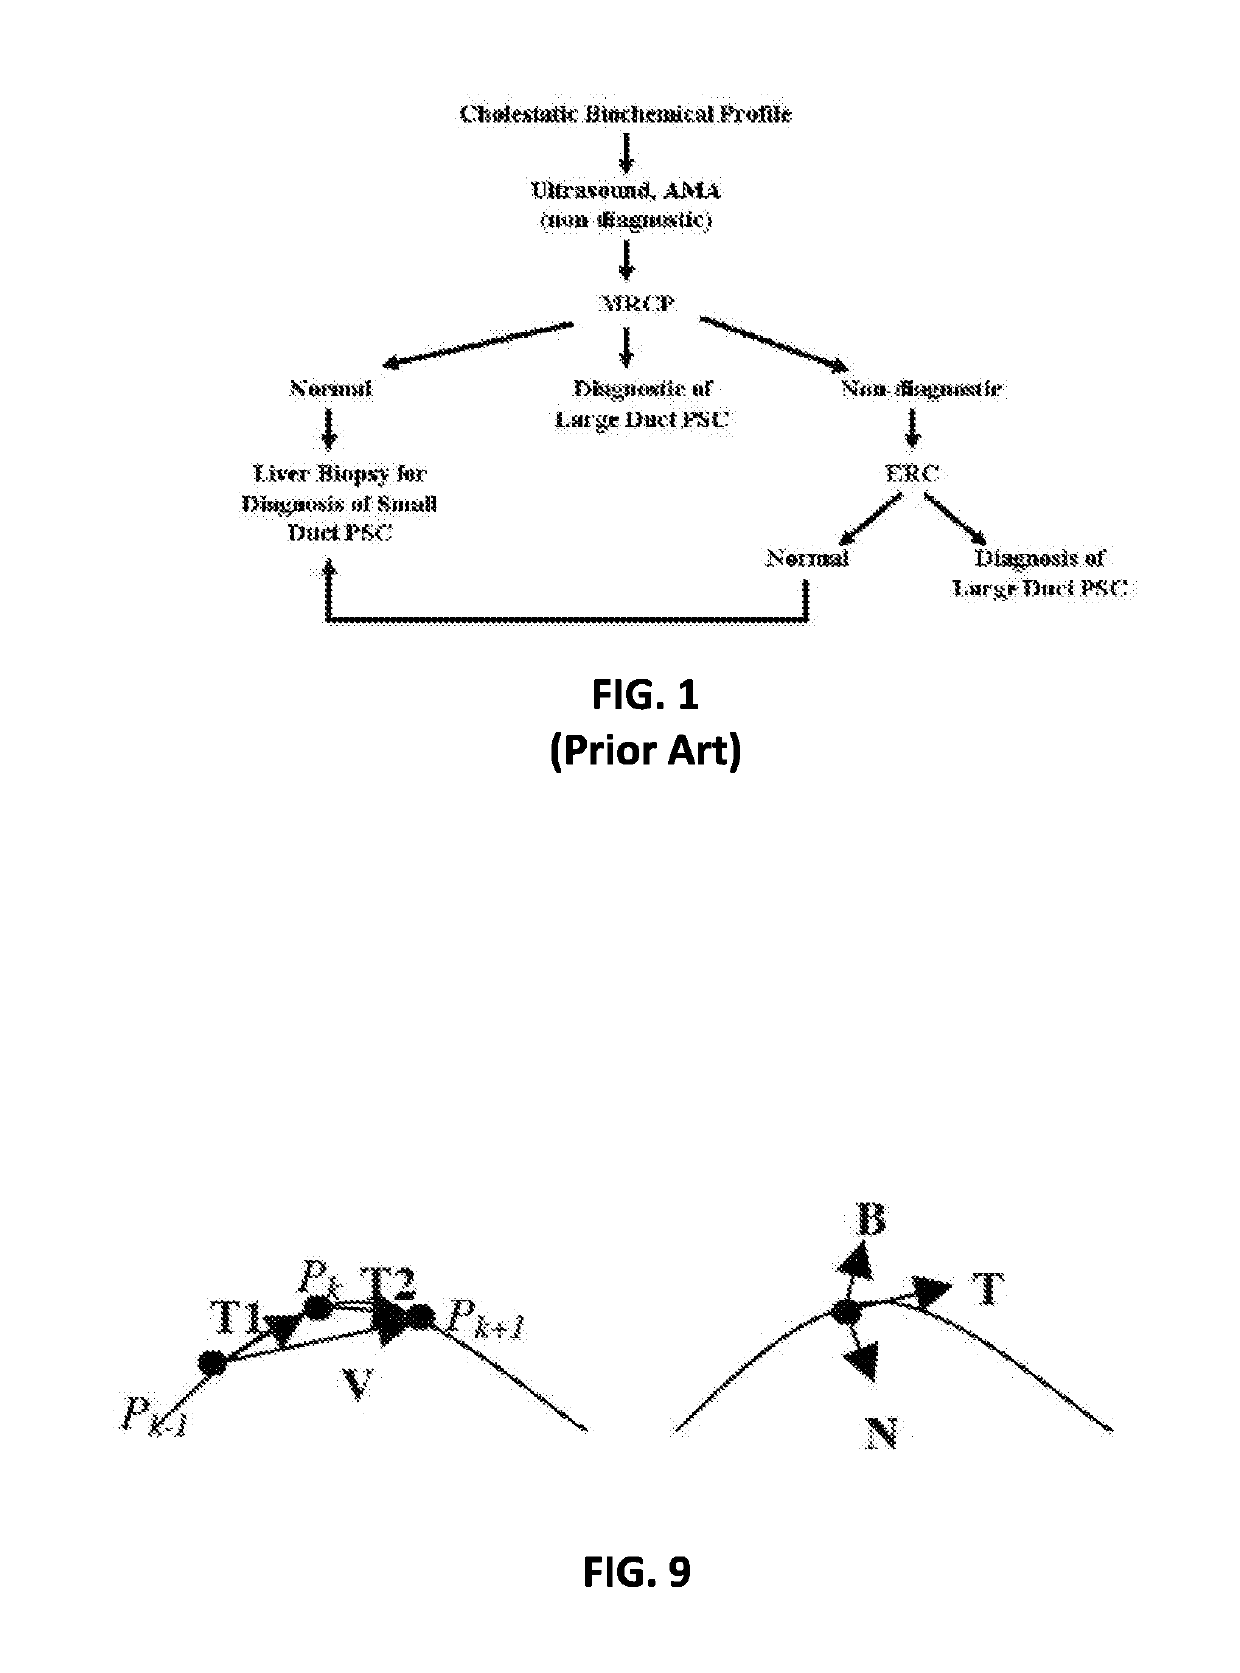 Method and apparatus for generating quantitative data for biliary tree structures